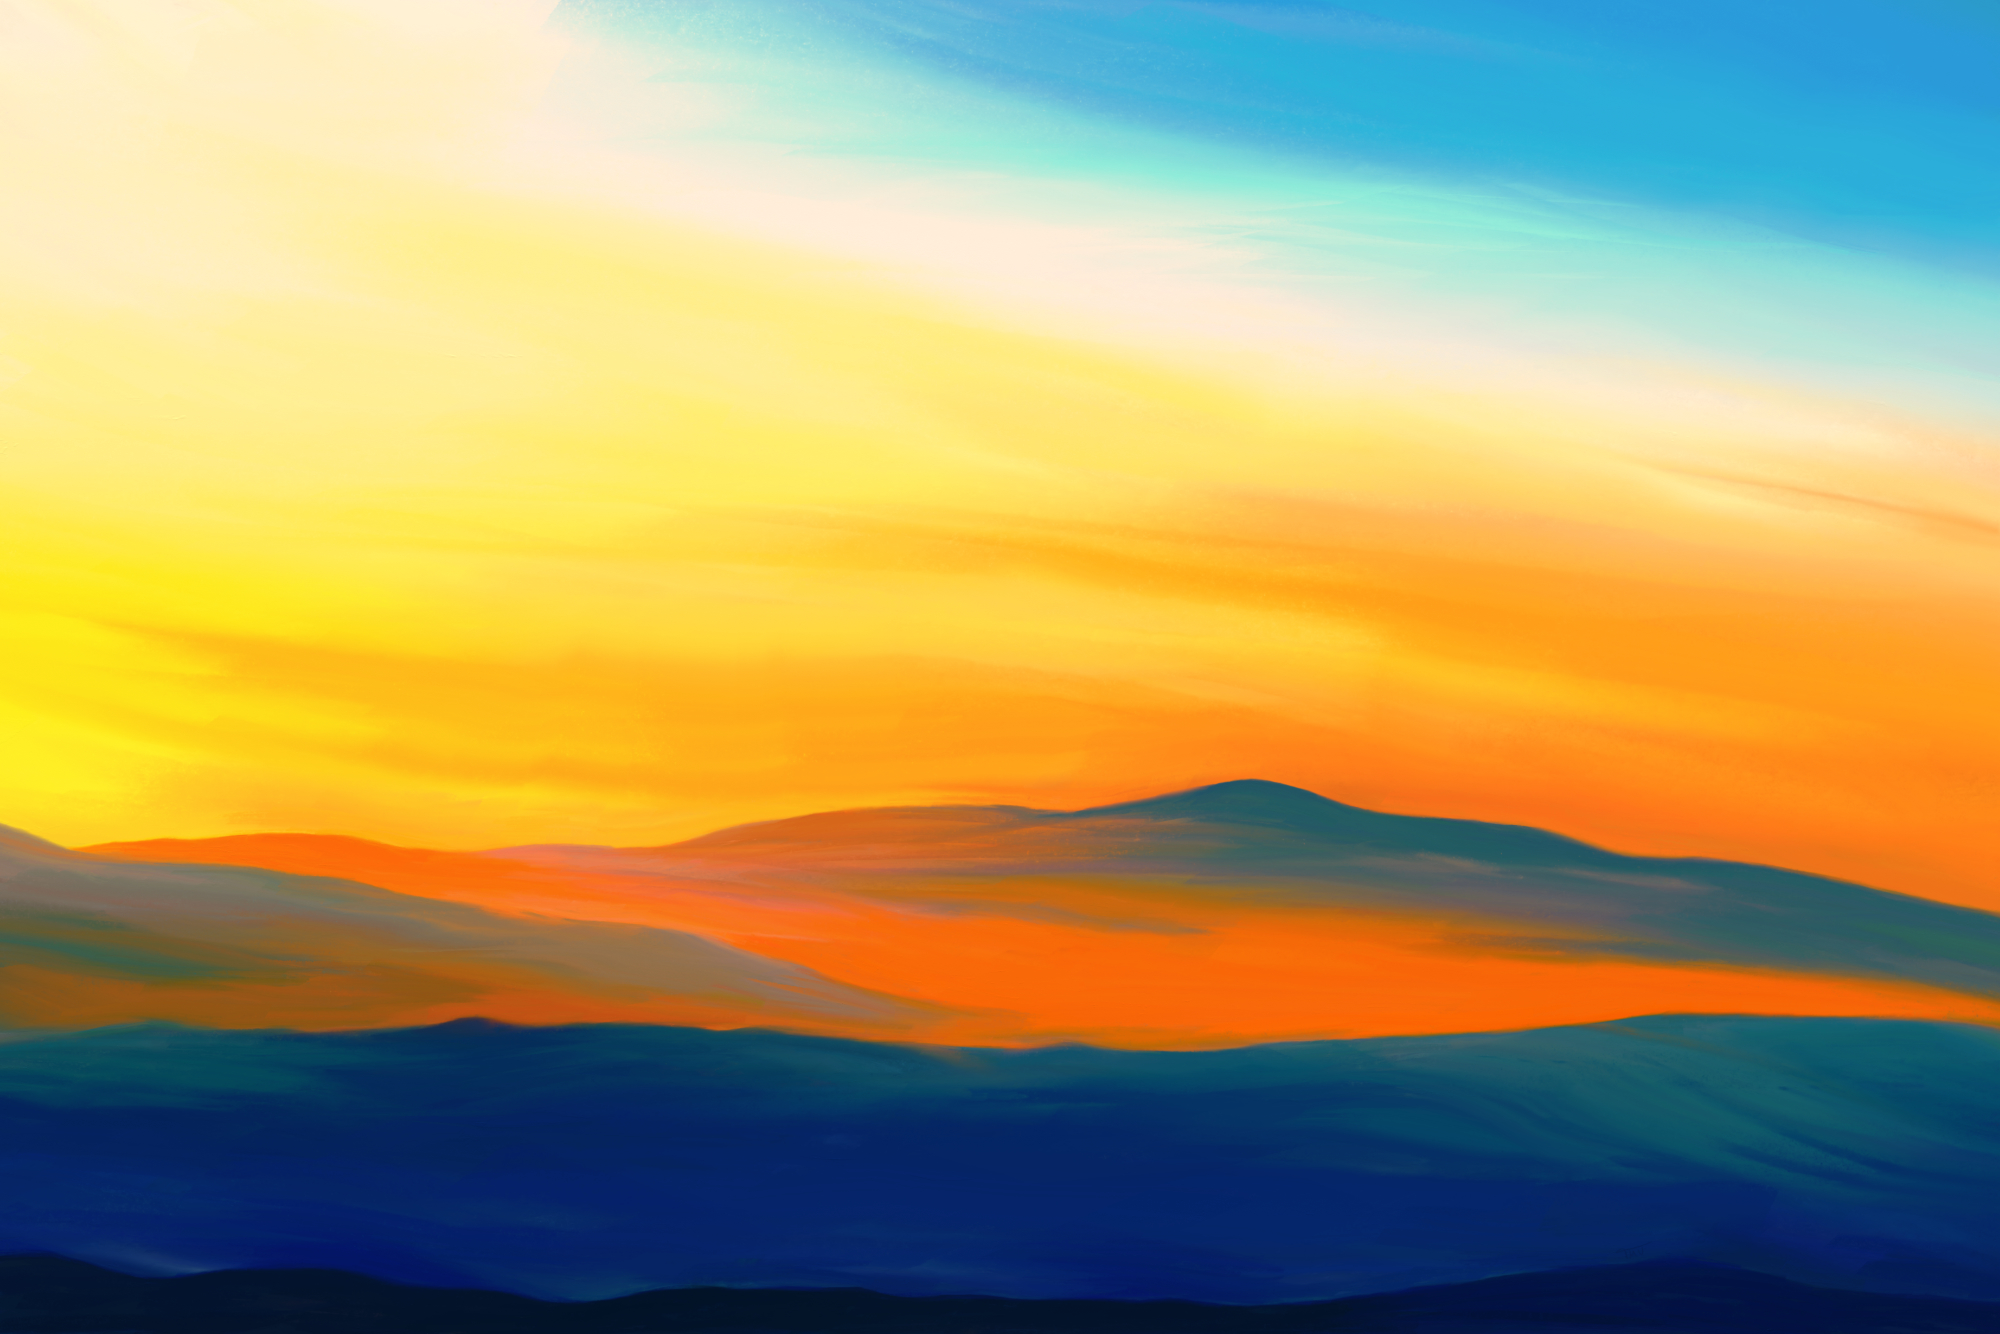 Digital acrylic painting of a peaceful landscape at sunrise with a yellow sky